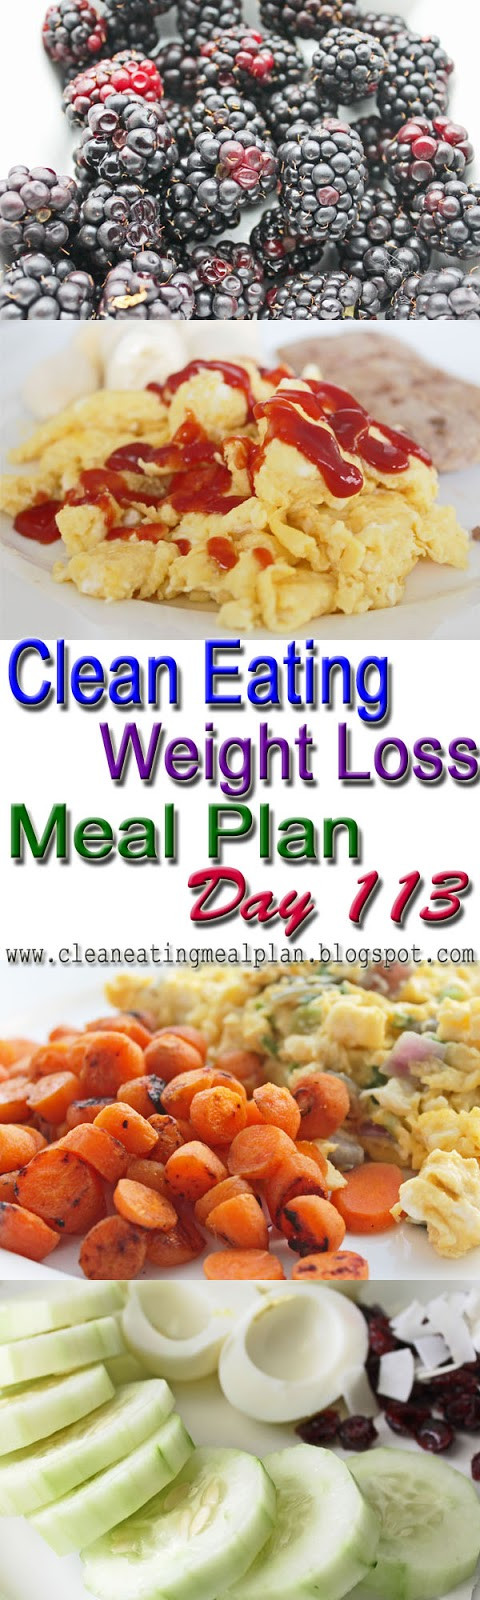 Clean Eating Weight Loss Meal Plans
 Clean Eating Weight Loss Meal Plan 113